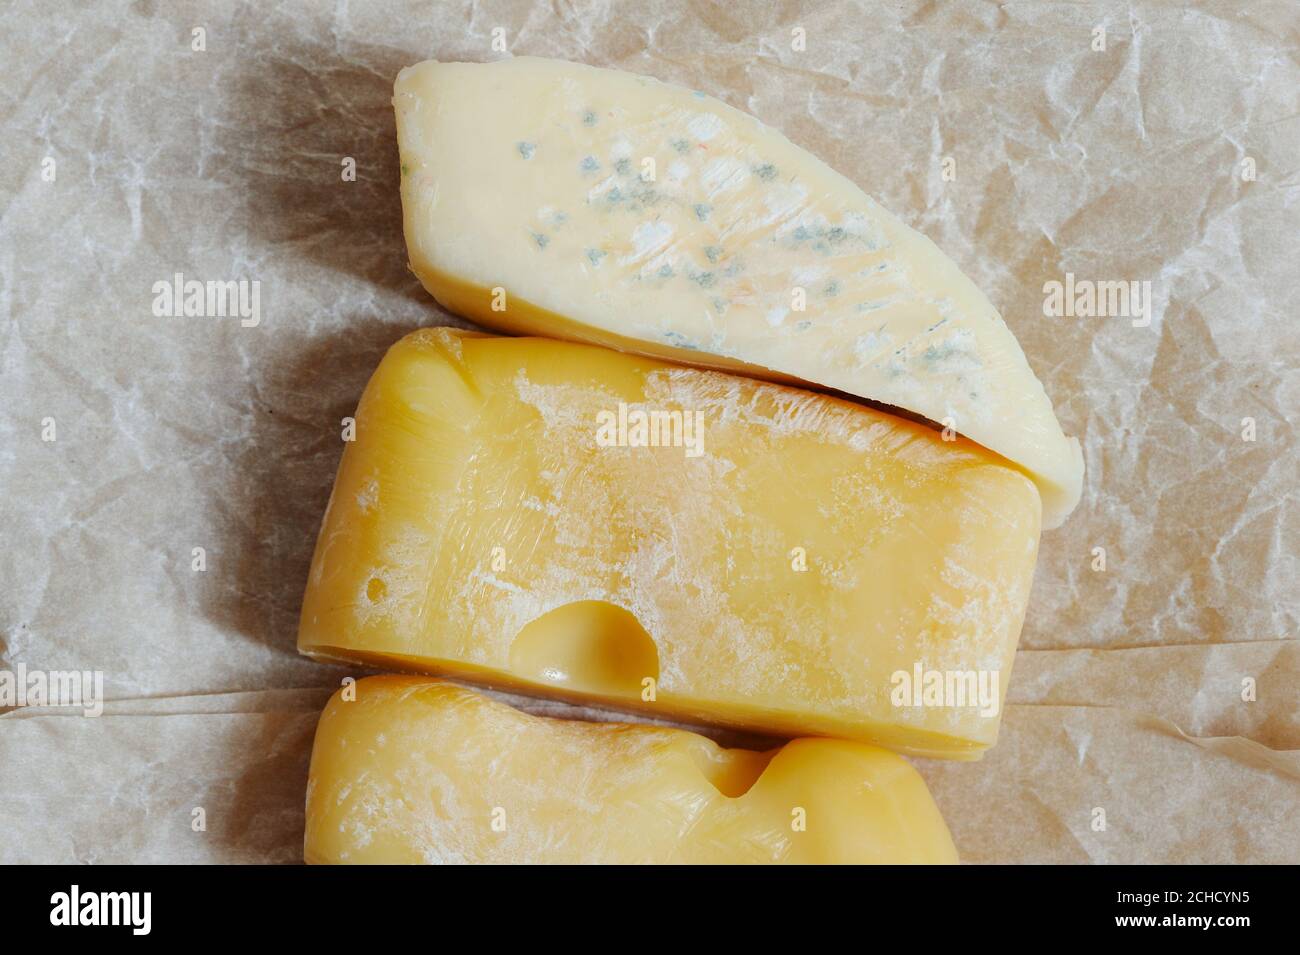 Mold on cheese. Hard cheese with white and black mold on it. Moldy fungus on food.  Fluffy spores mold . Stock Photo